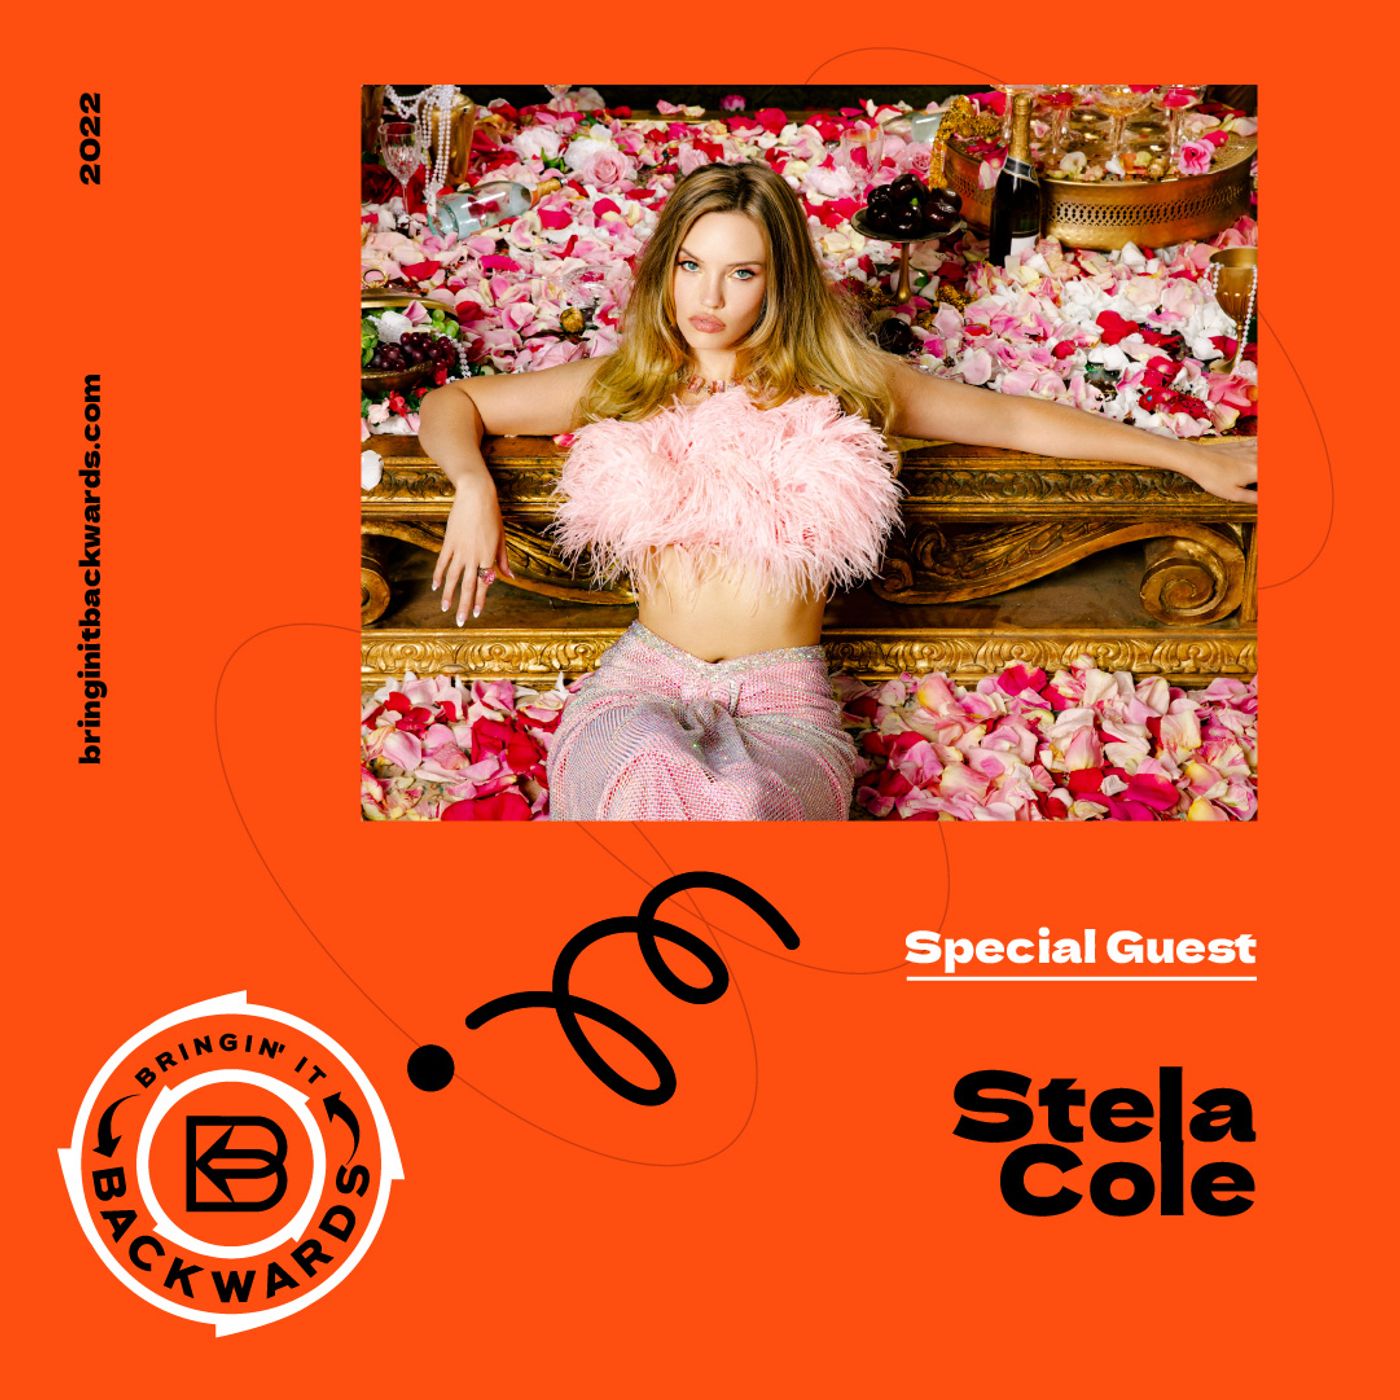 Interview with Stela Cole